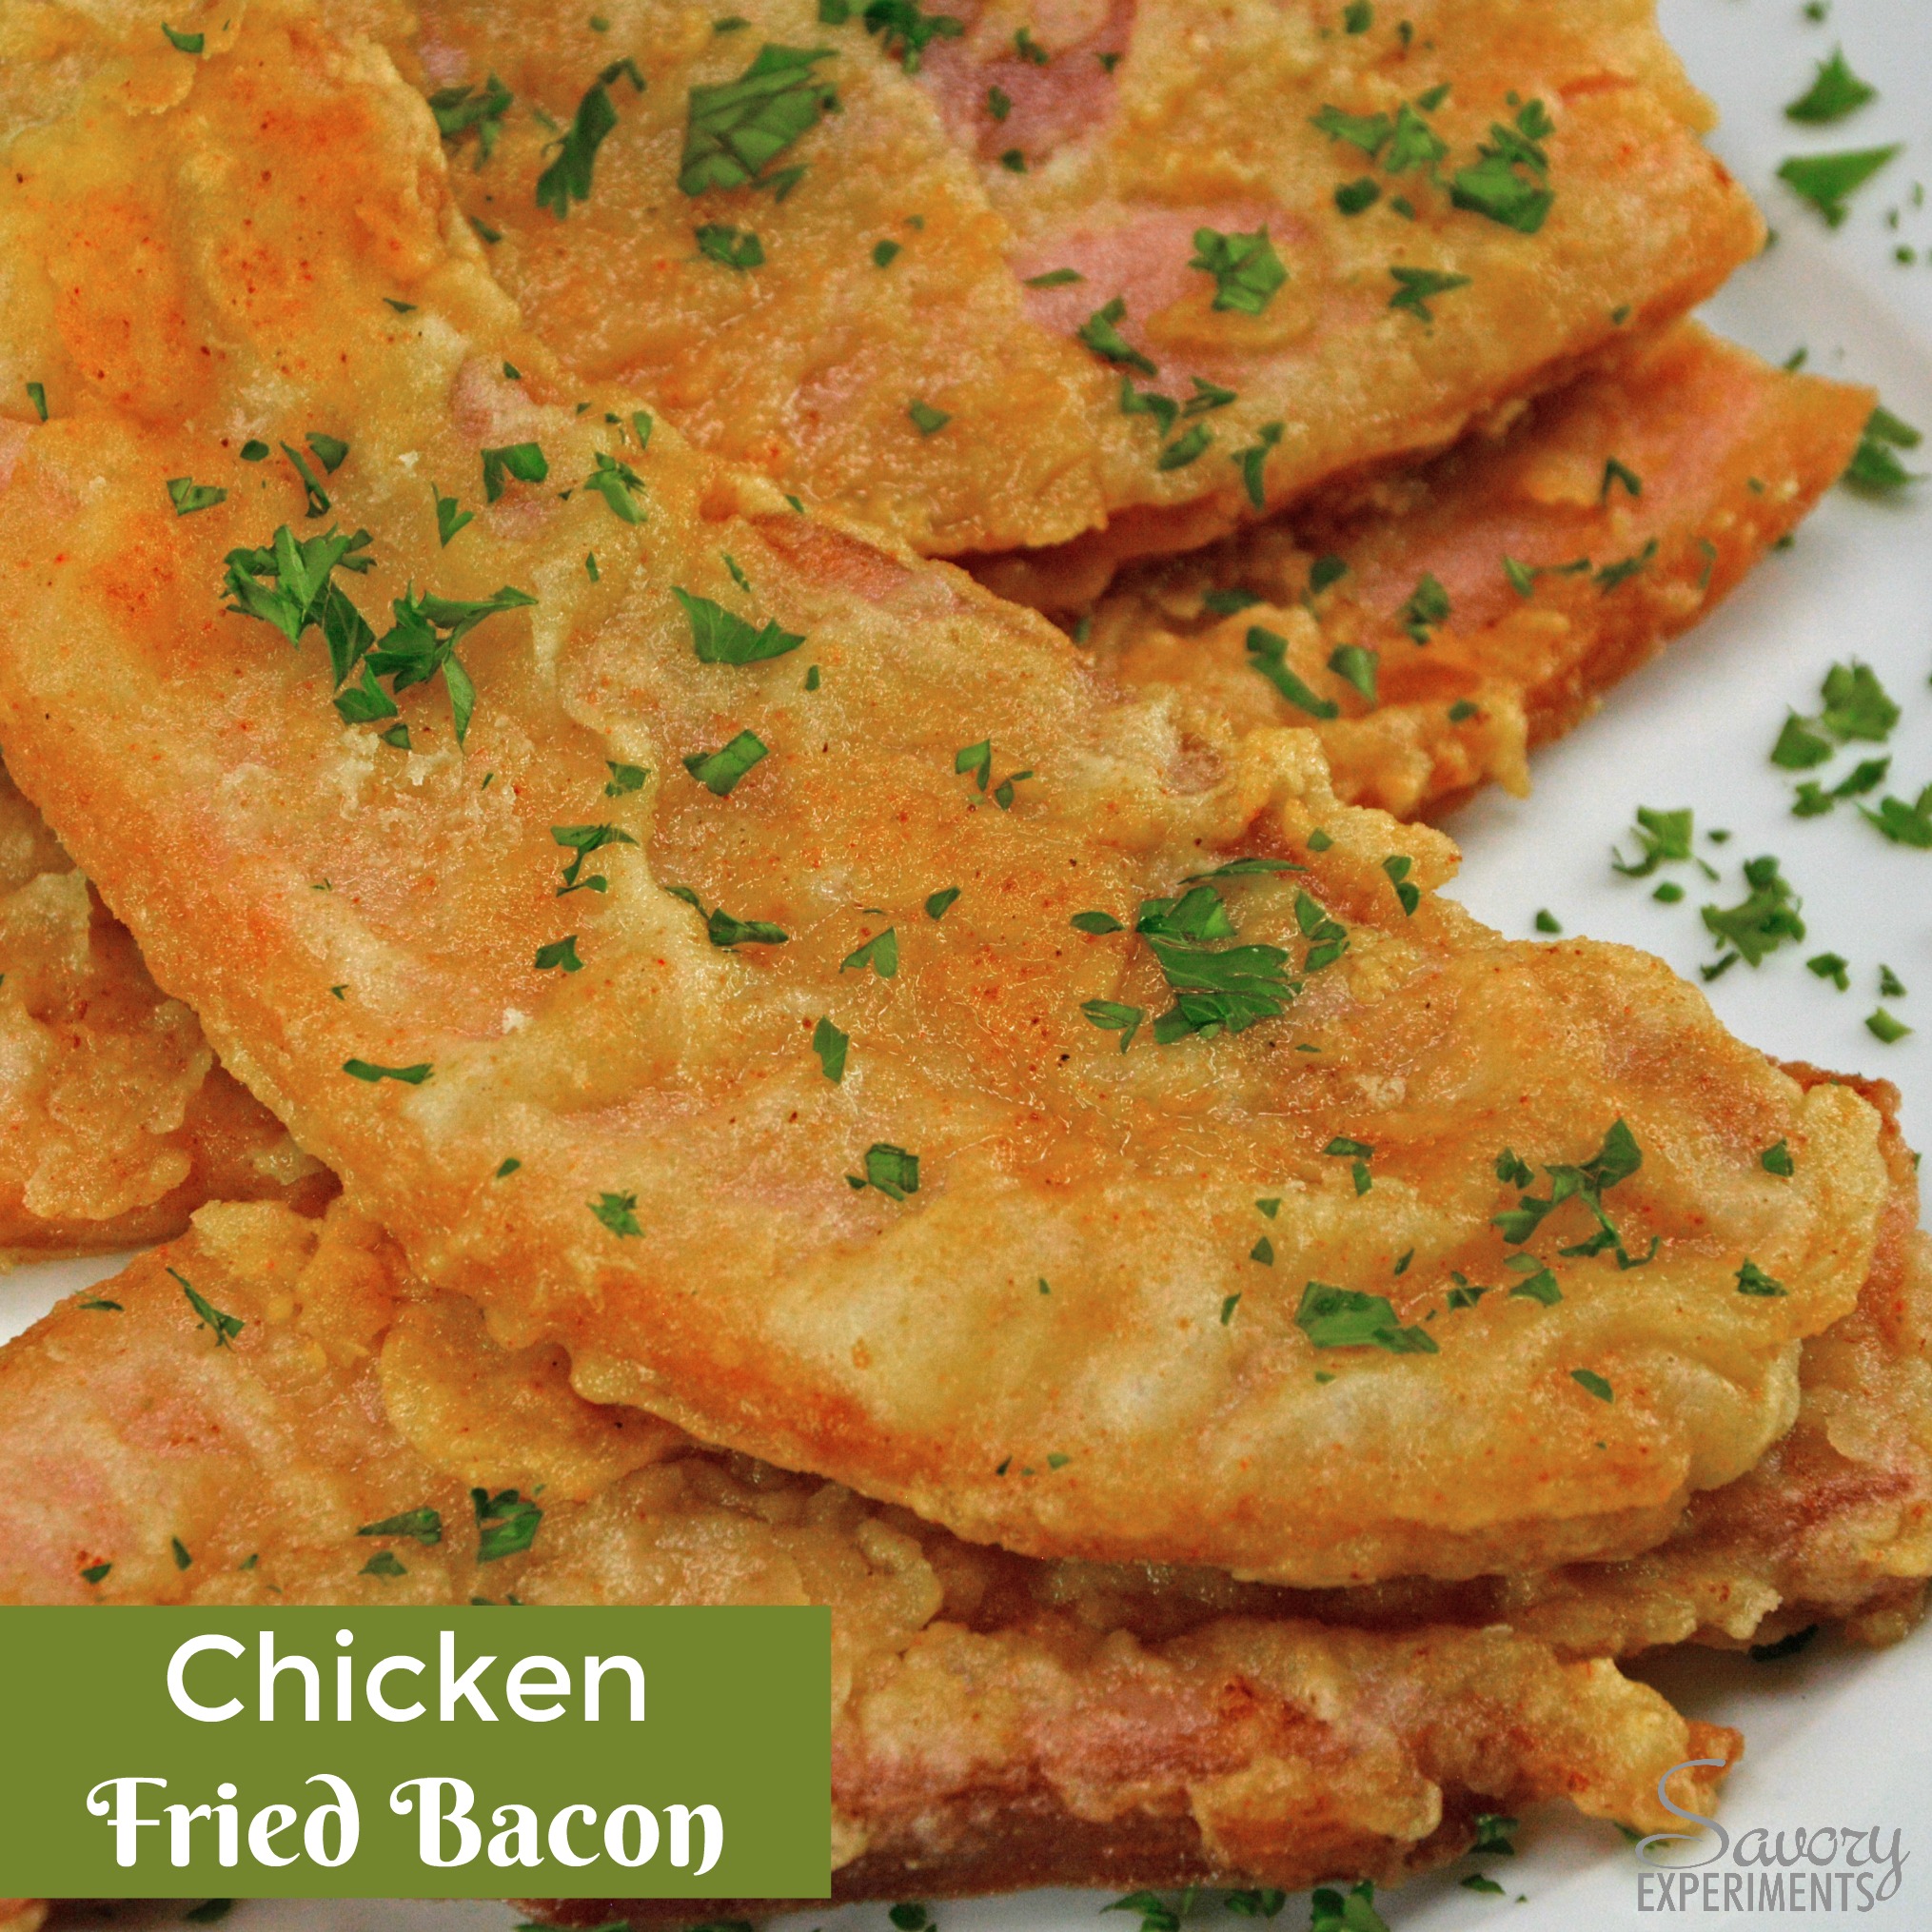 Chicken Fried Bacon - Savory Experiments